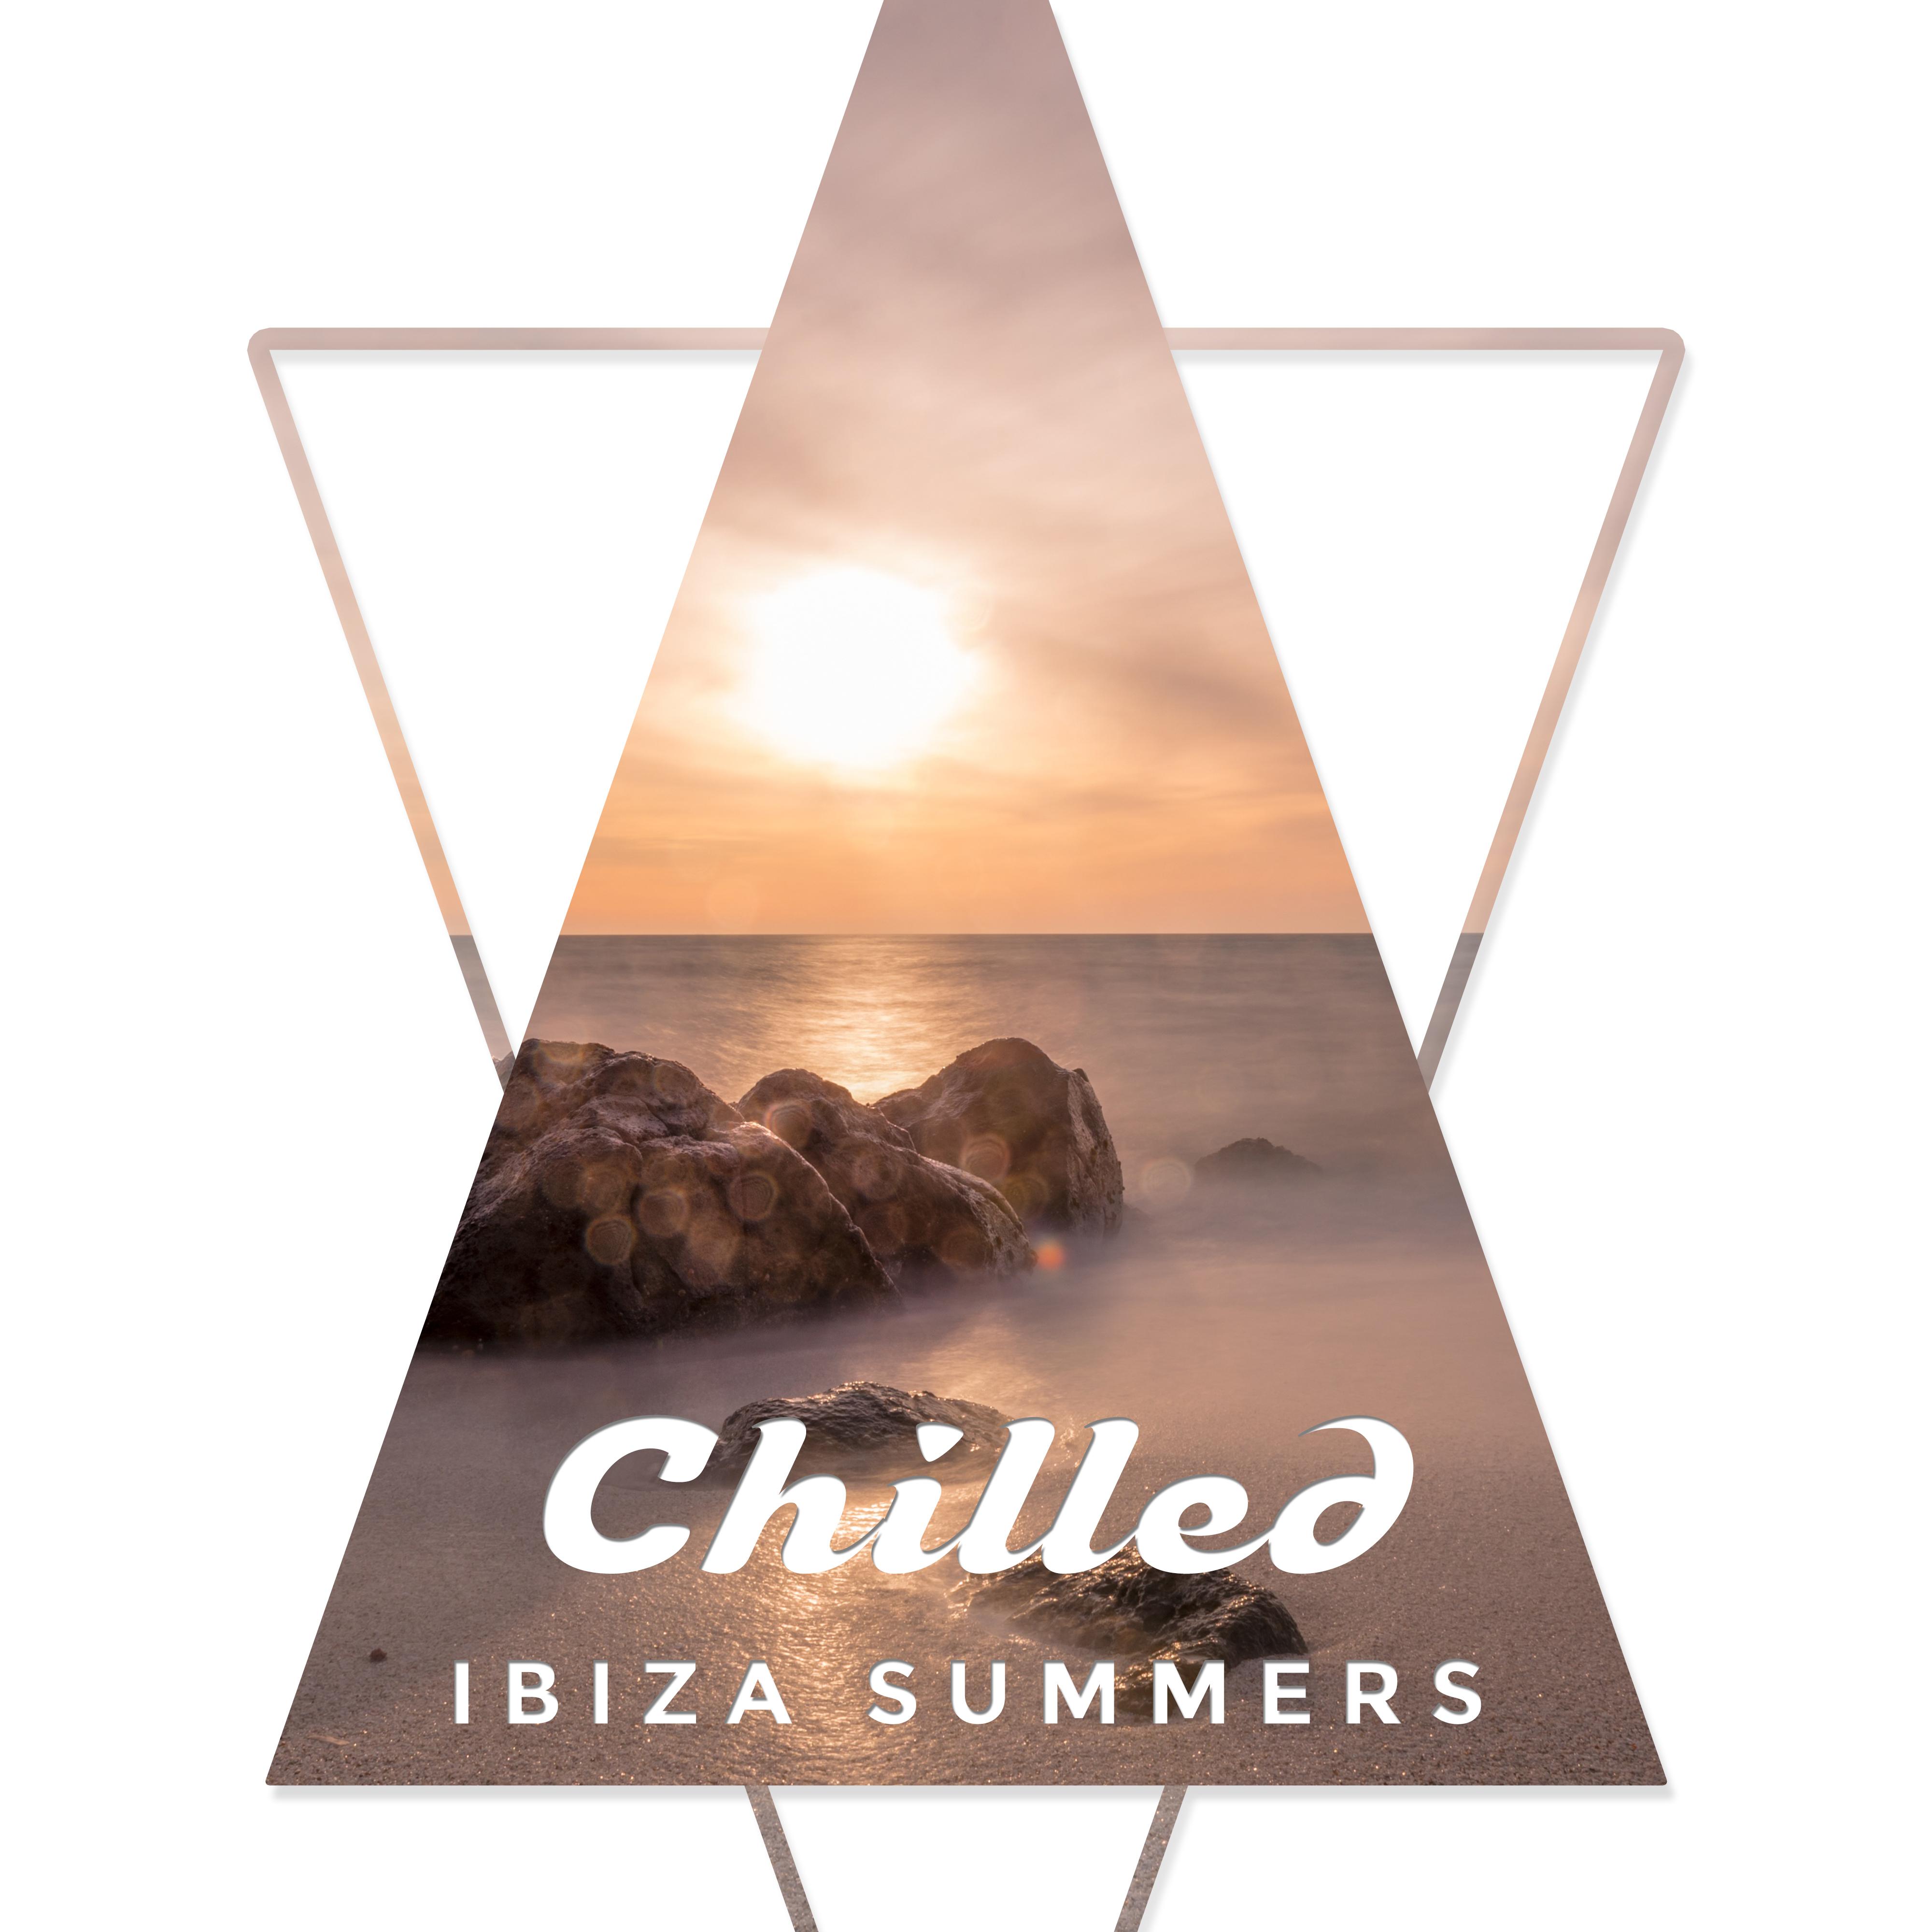 Chilled Ibiza Summers